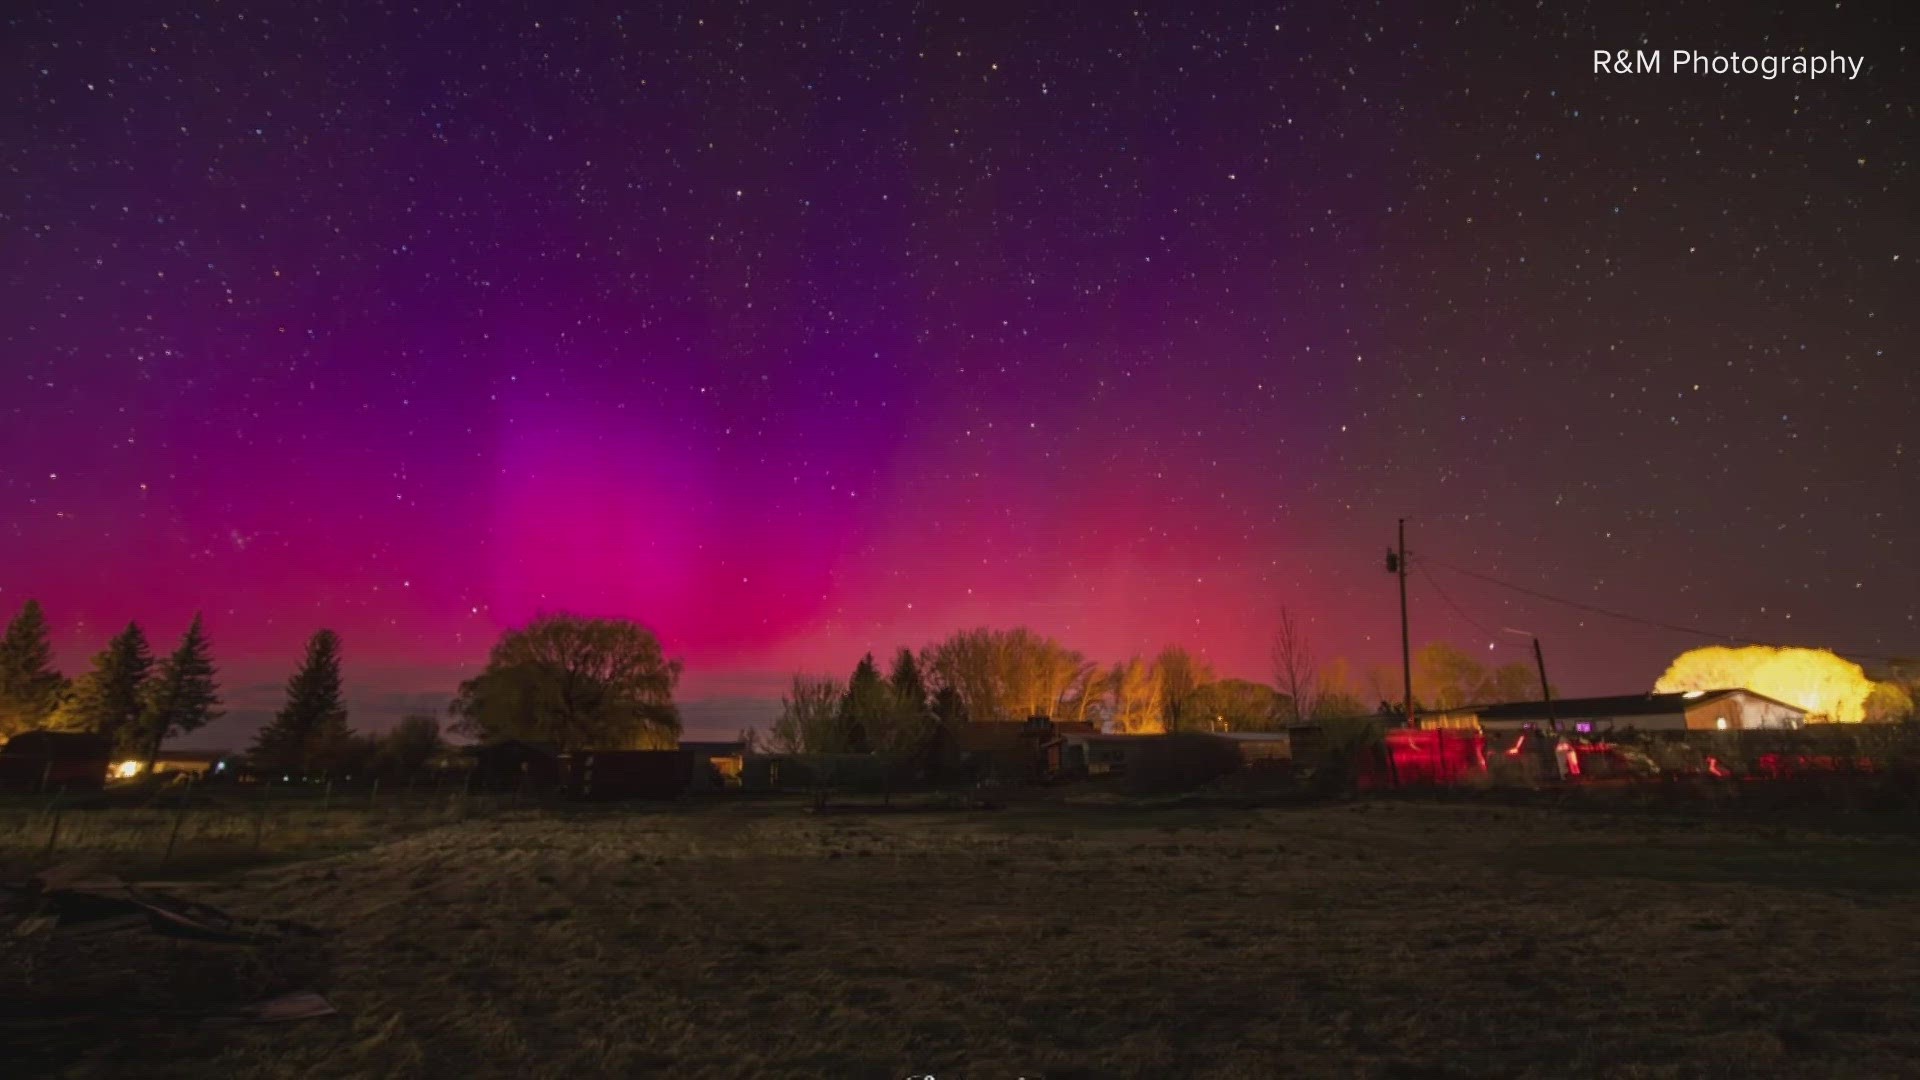 Some very lucky viewers had the opportunity Sunday night to see the Northern Lights in Arizona.